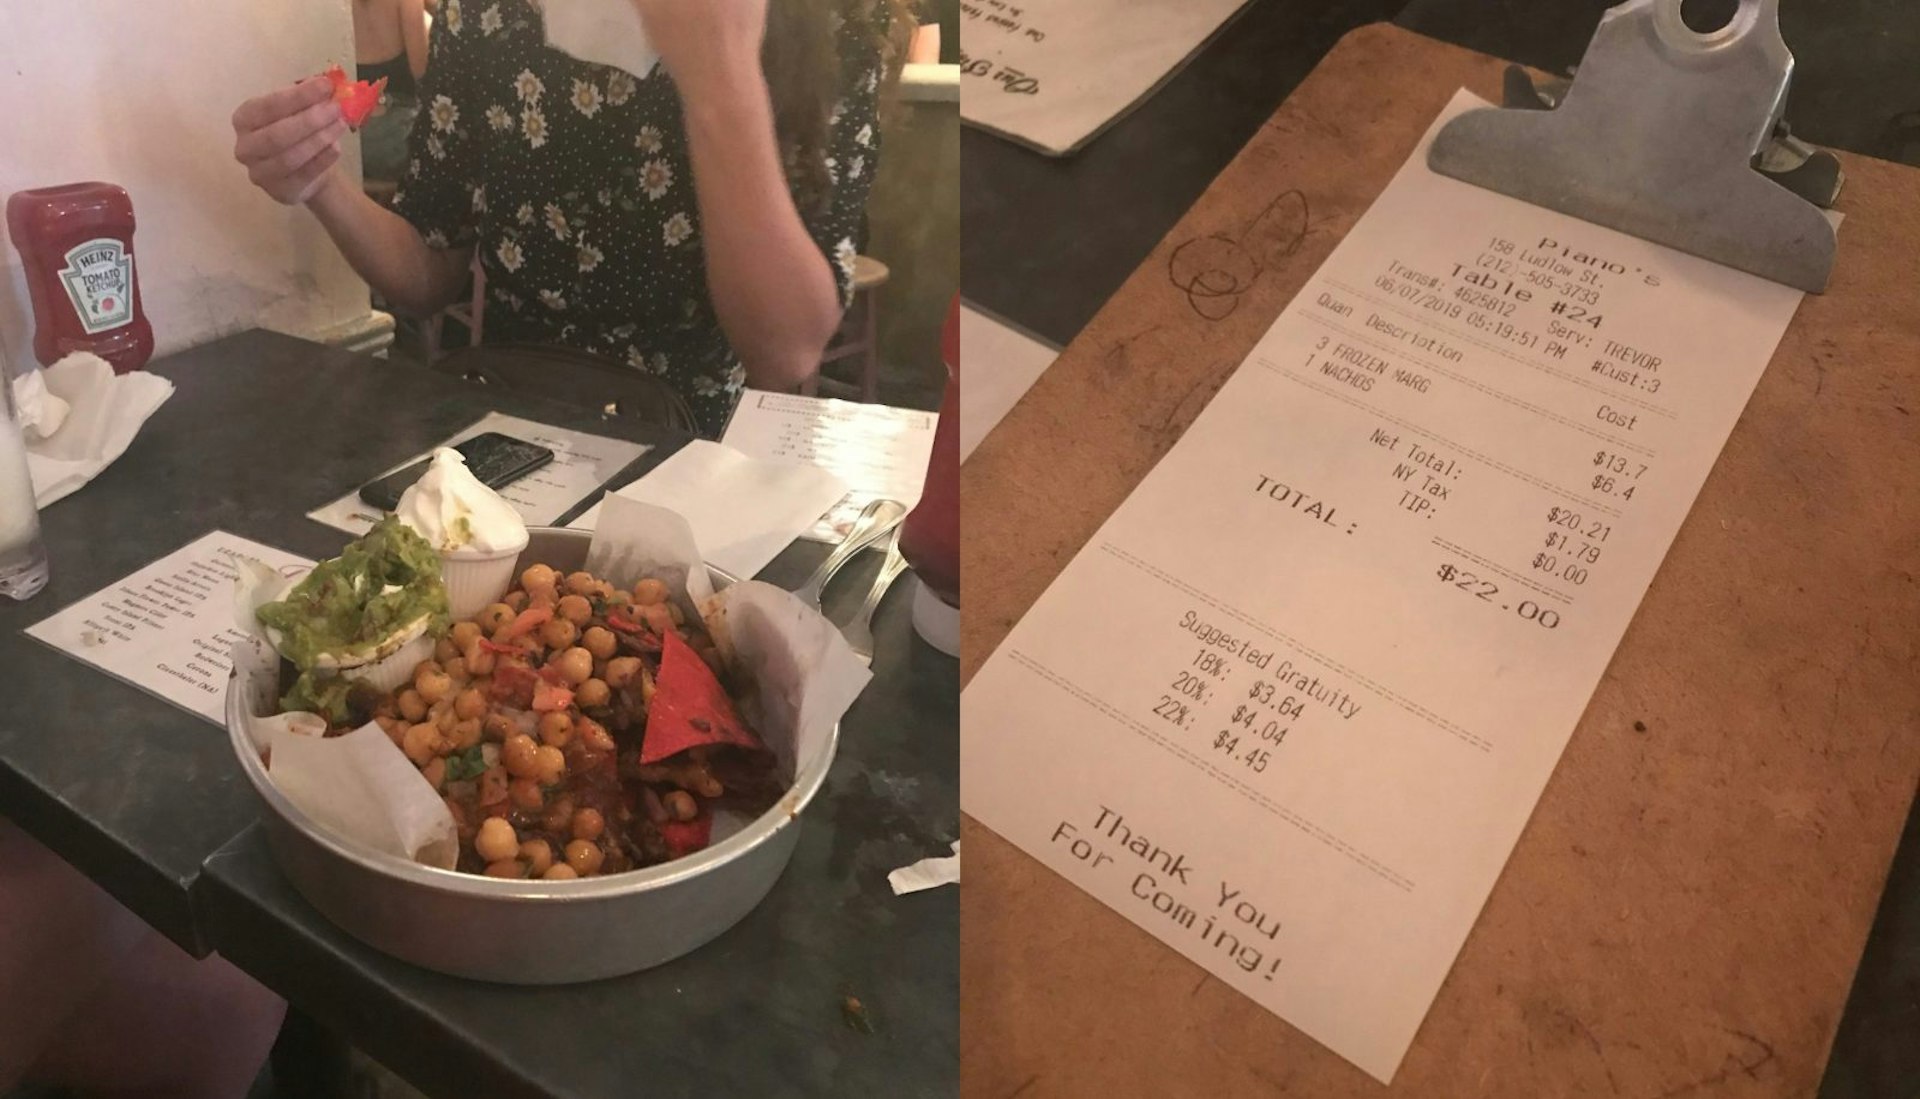 Two images: the image on the left is of a table with a large dish of loaded nachos and two menus. The second image is of the bill for the food and drinks.